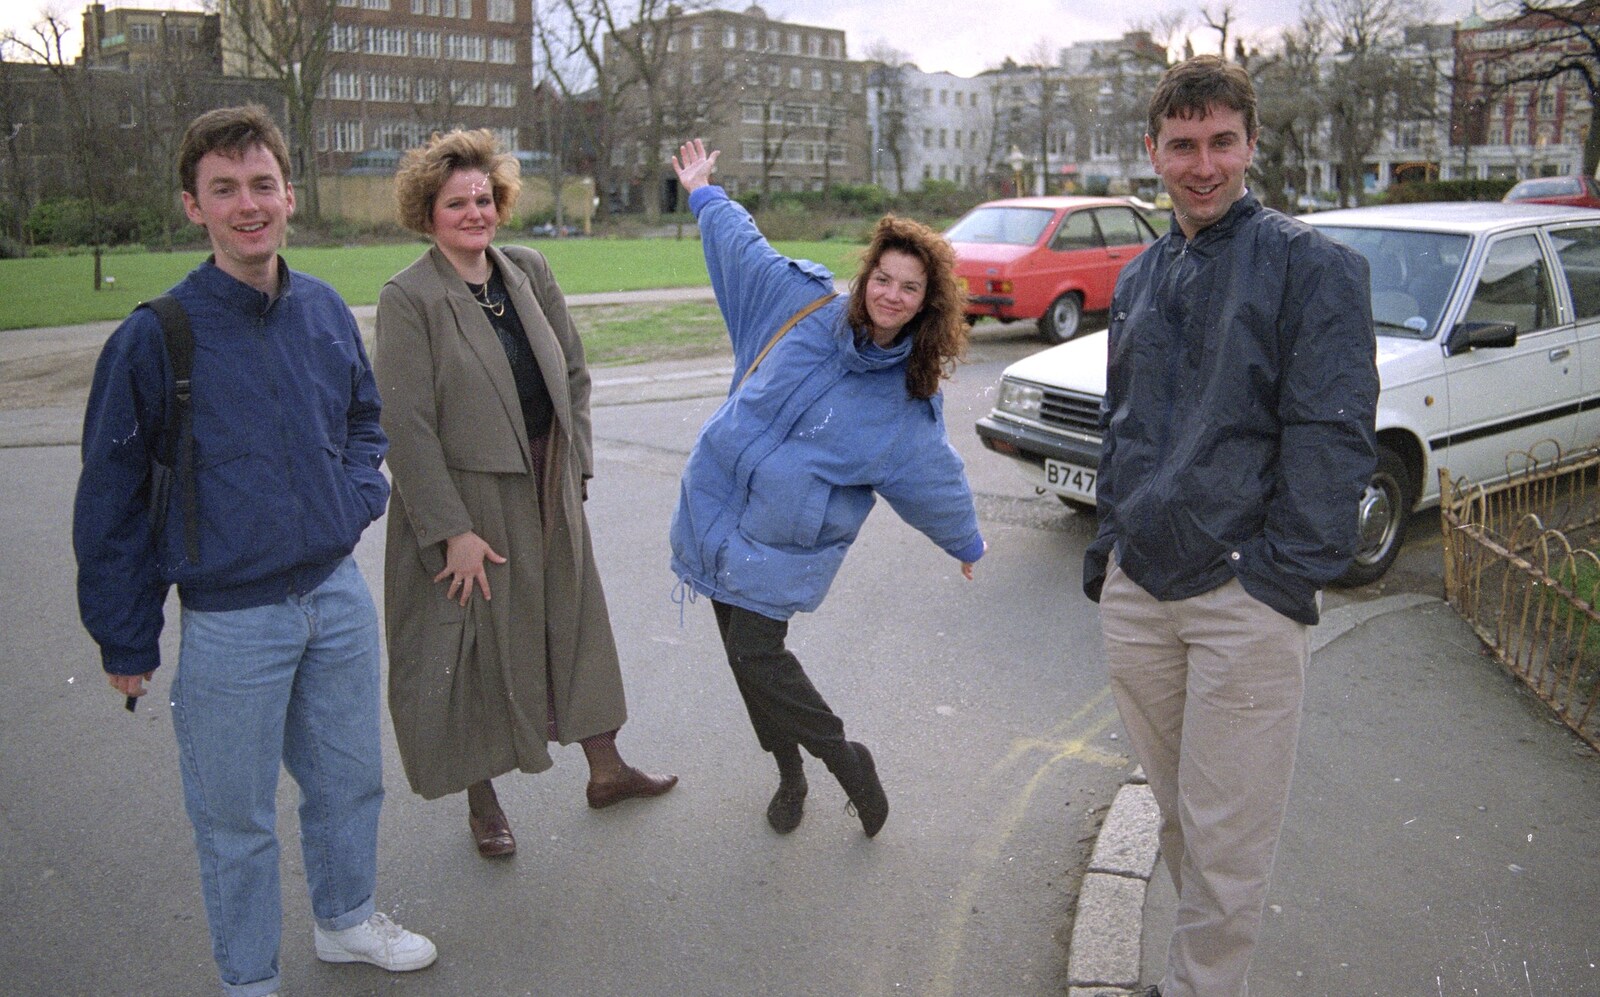 We bump in to Alison Rowe and her friend from Brighton Rock: Visiting Riki and John, Brighton, East Sussex - 5th March 1990